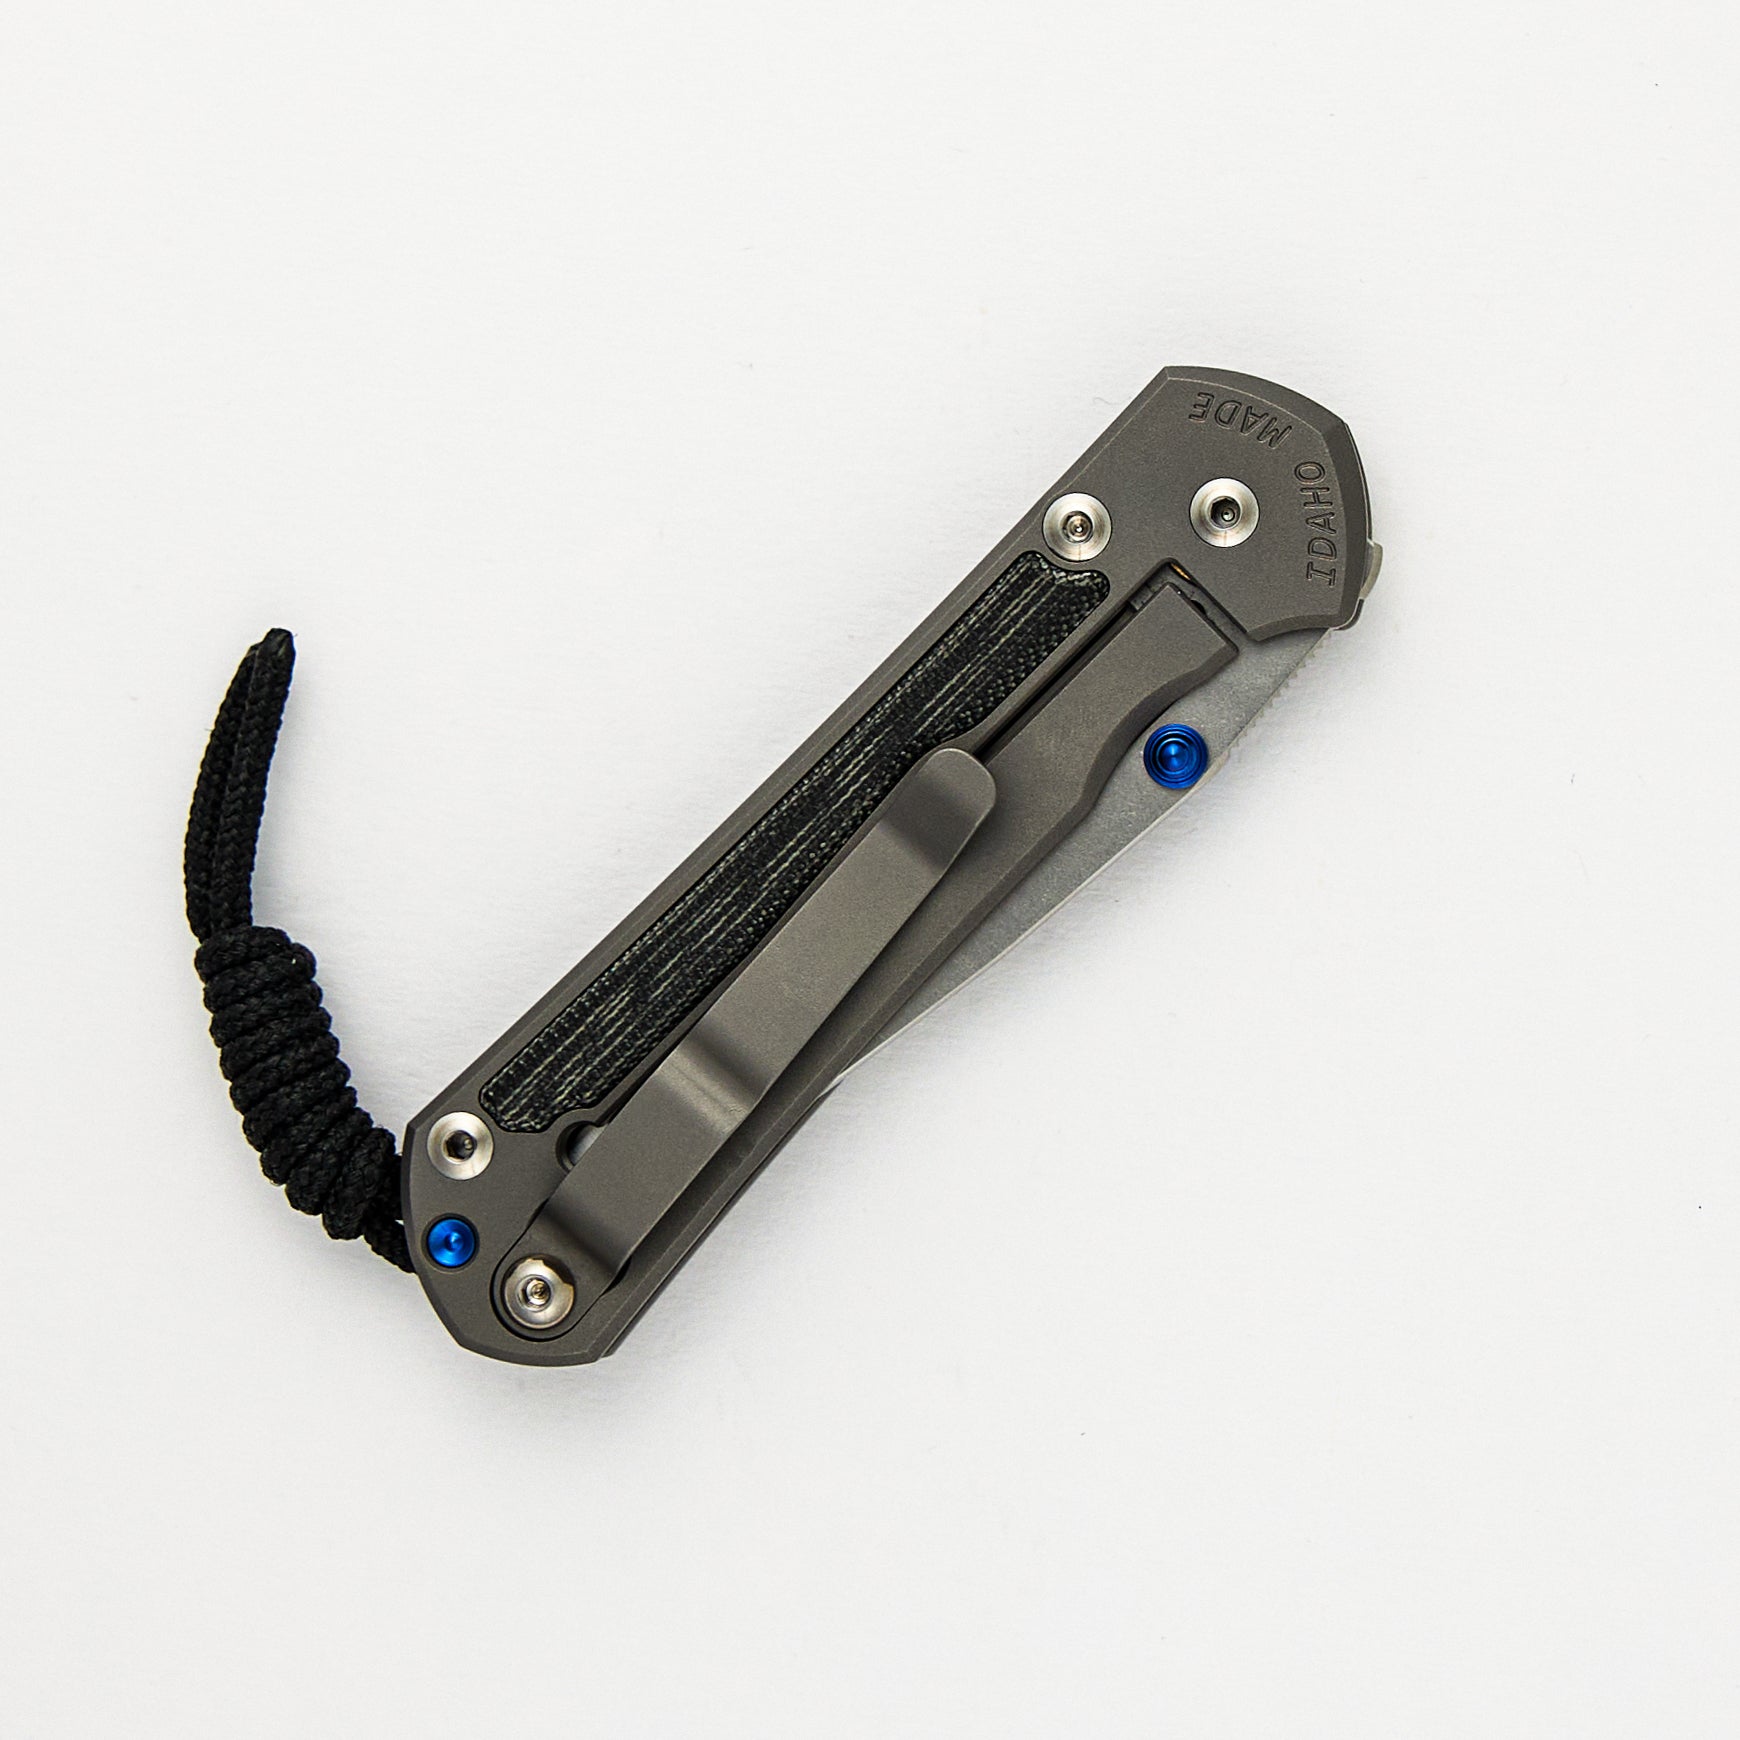 CHRIS REEVE SMALL SEBENZA 31 BLACK CANVAS MICARTA INLAY – POLISHED CPM MAGNACUT BLADE – GLASS BLASTED – BLUE DOUBLE THUMB LUGS